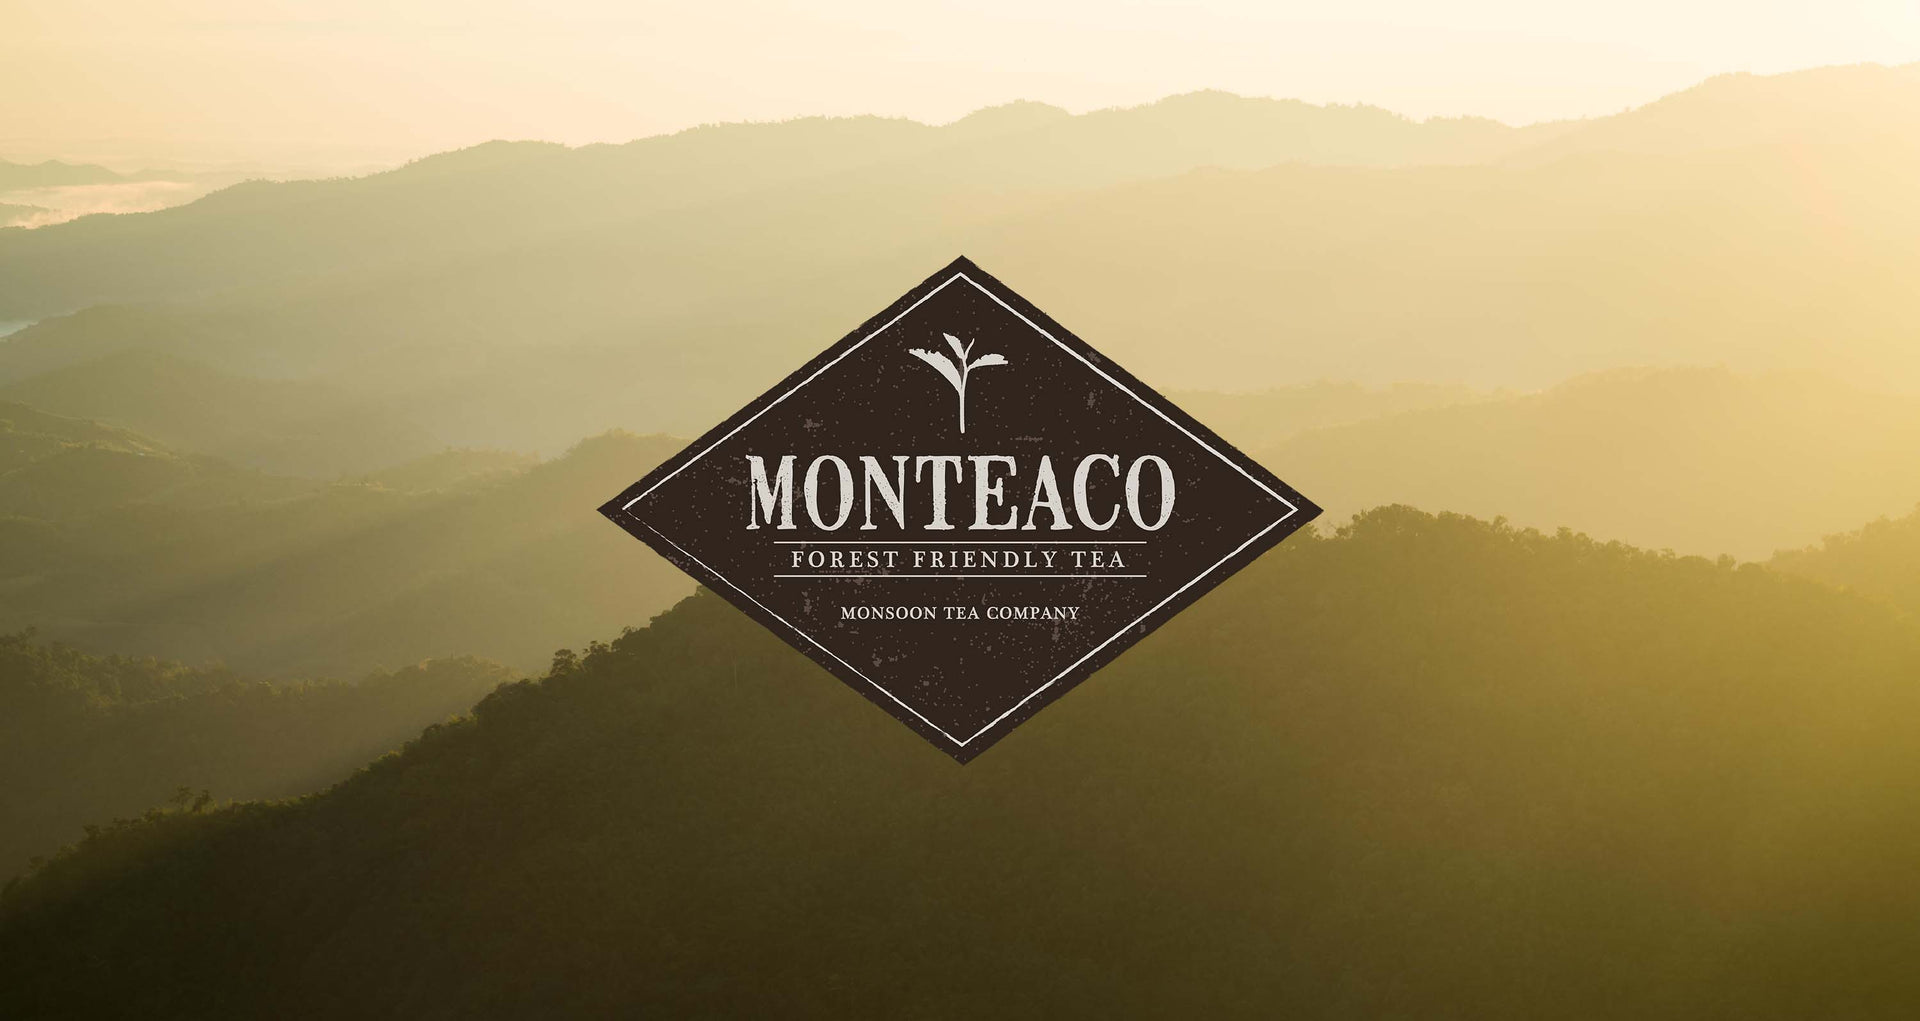 Load video: Monteaco Forest Friendly Tea